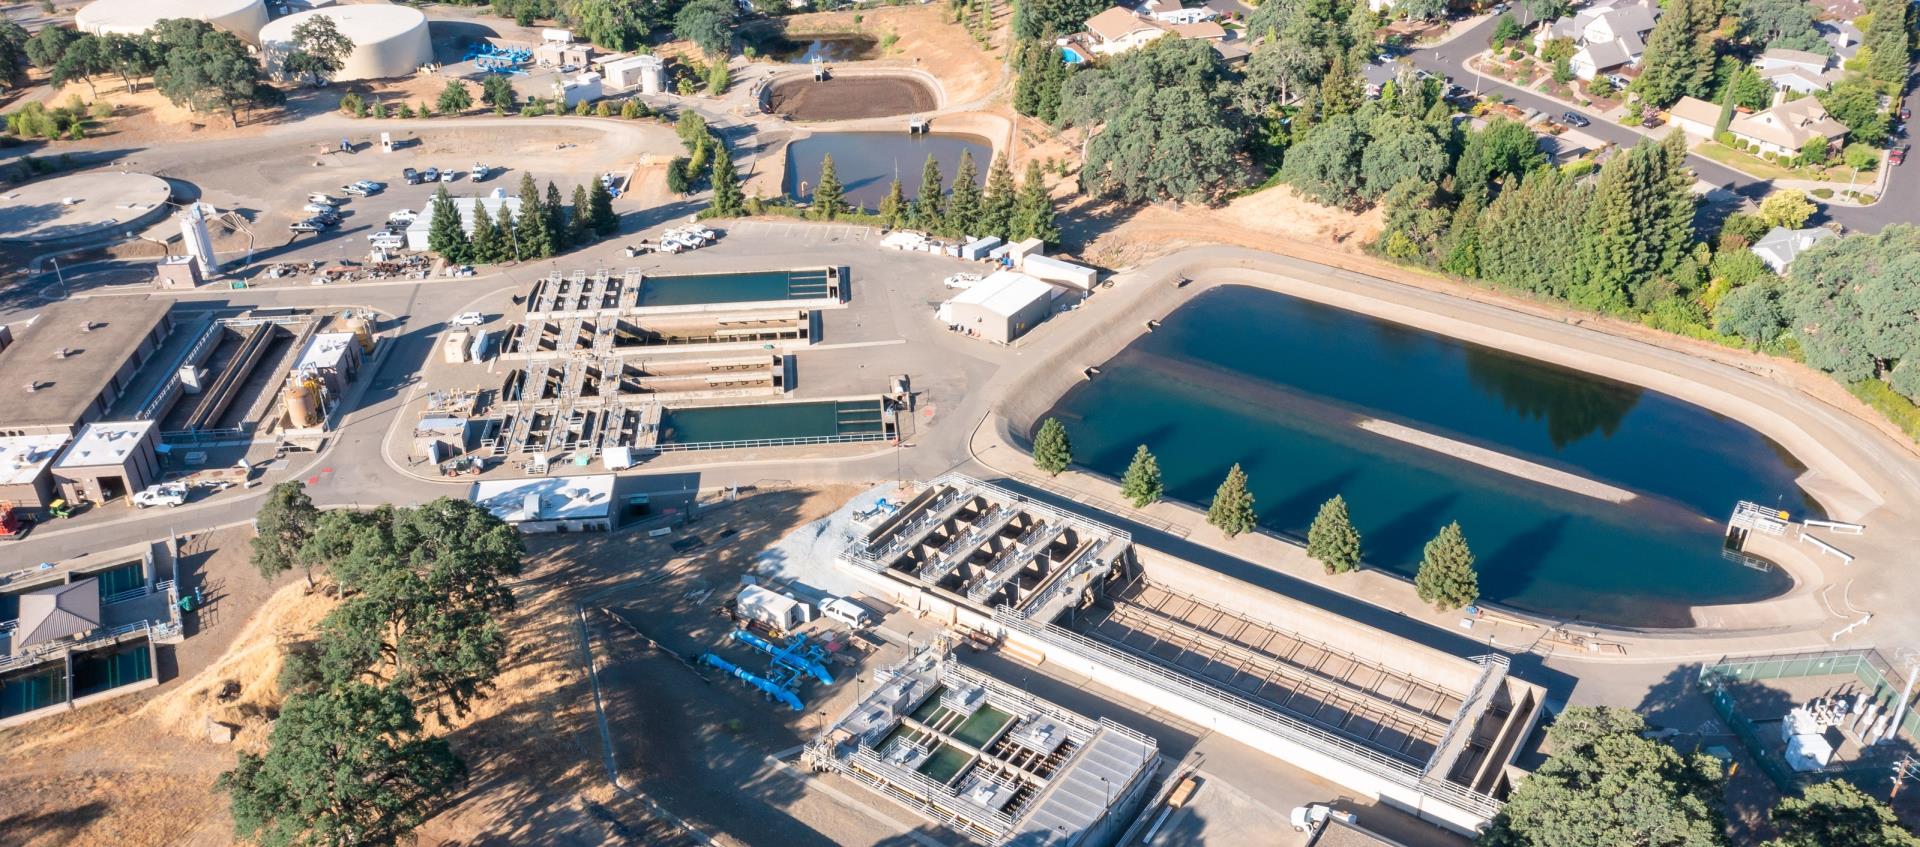 Water Treatment Plant Aerials 2021-4 - cropped